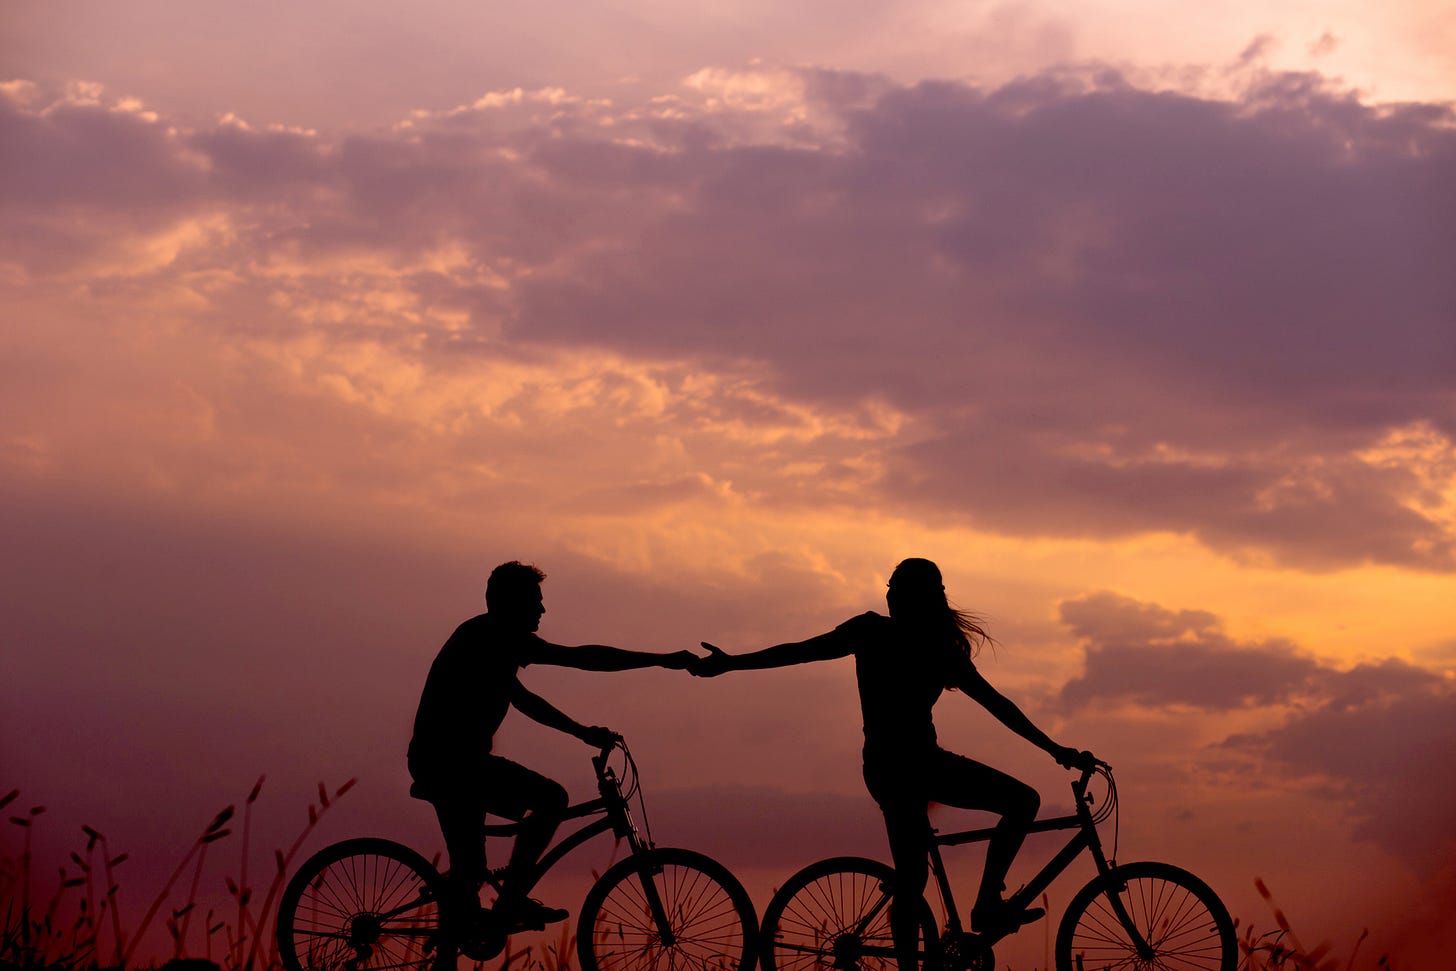 Silhouettes of a man and woman on bicycles with arms outstreched holding hands against a backdrop of a pink and purple cloudy sky.